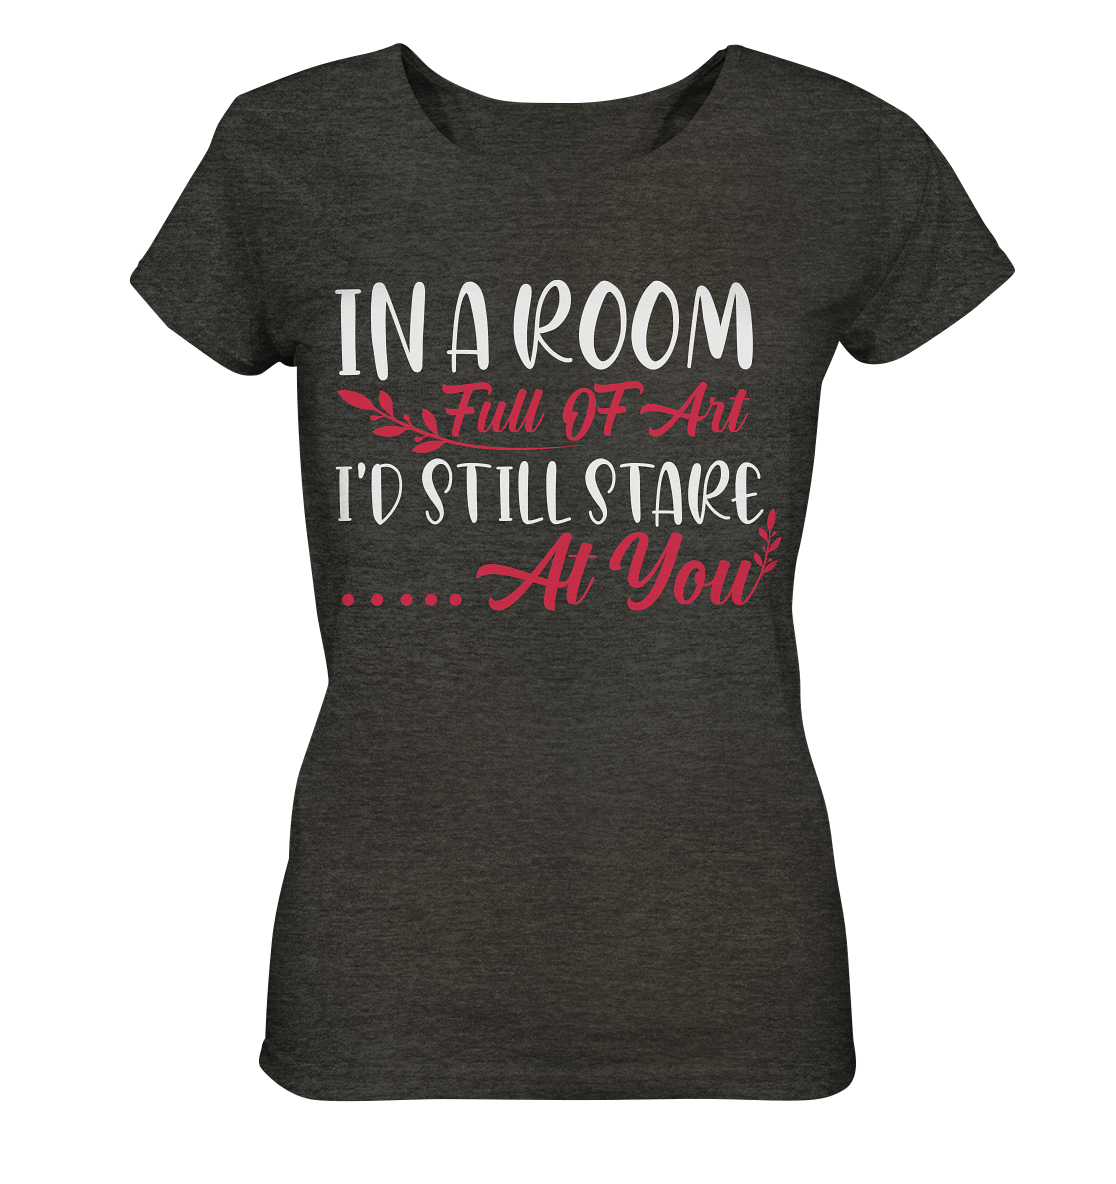 In a room full of art i´d still stare at you - Ladies Organic Shirt (mottled)